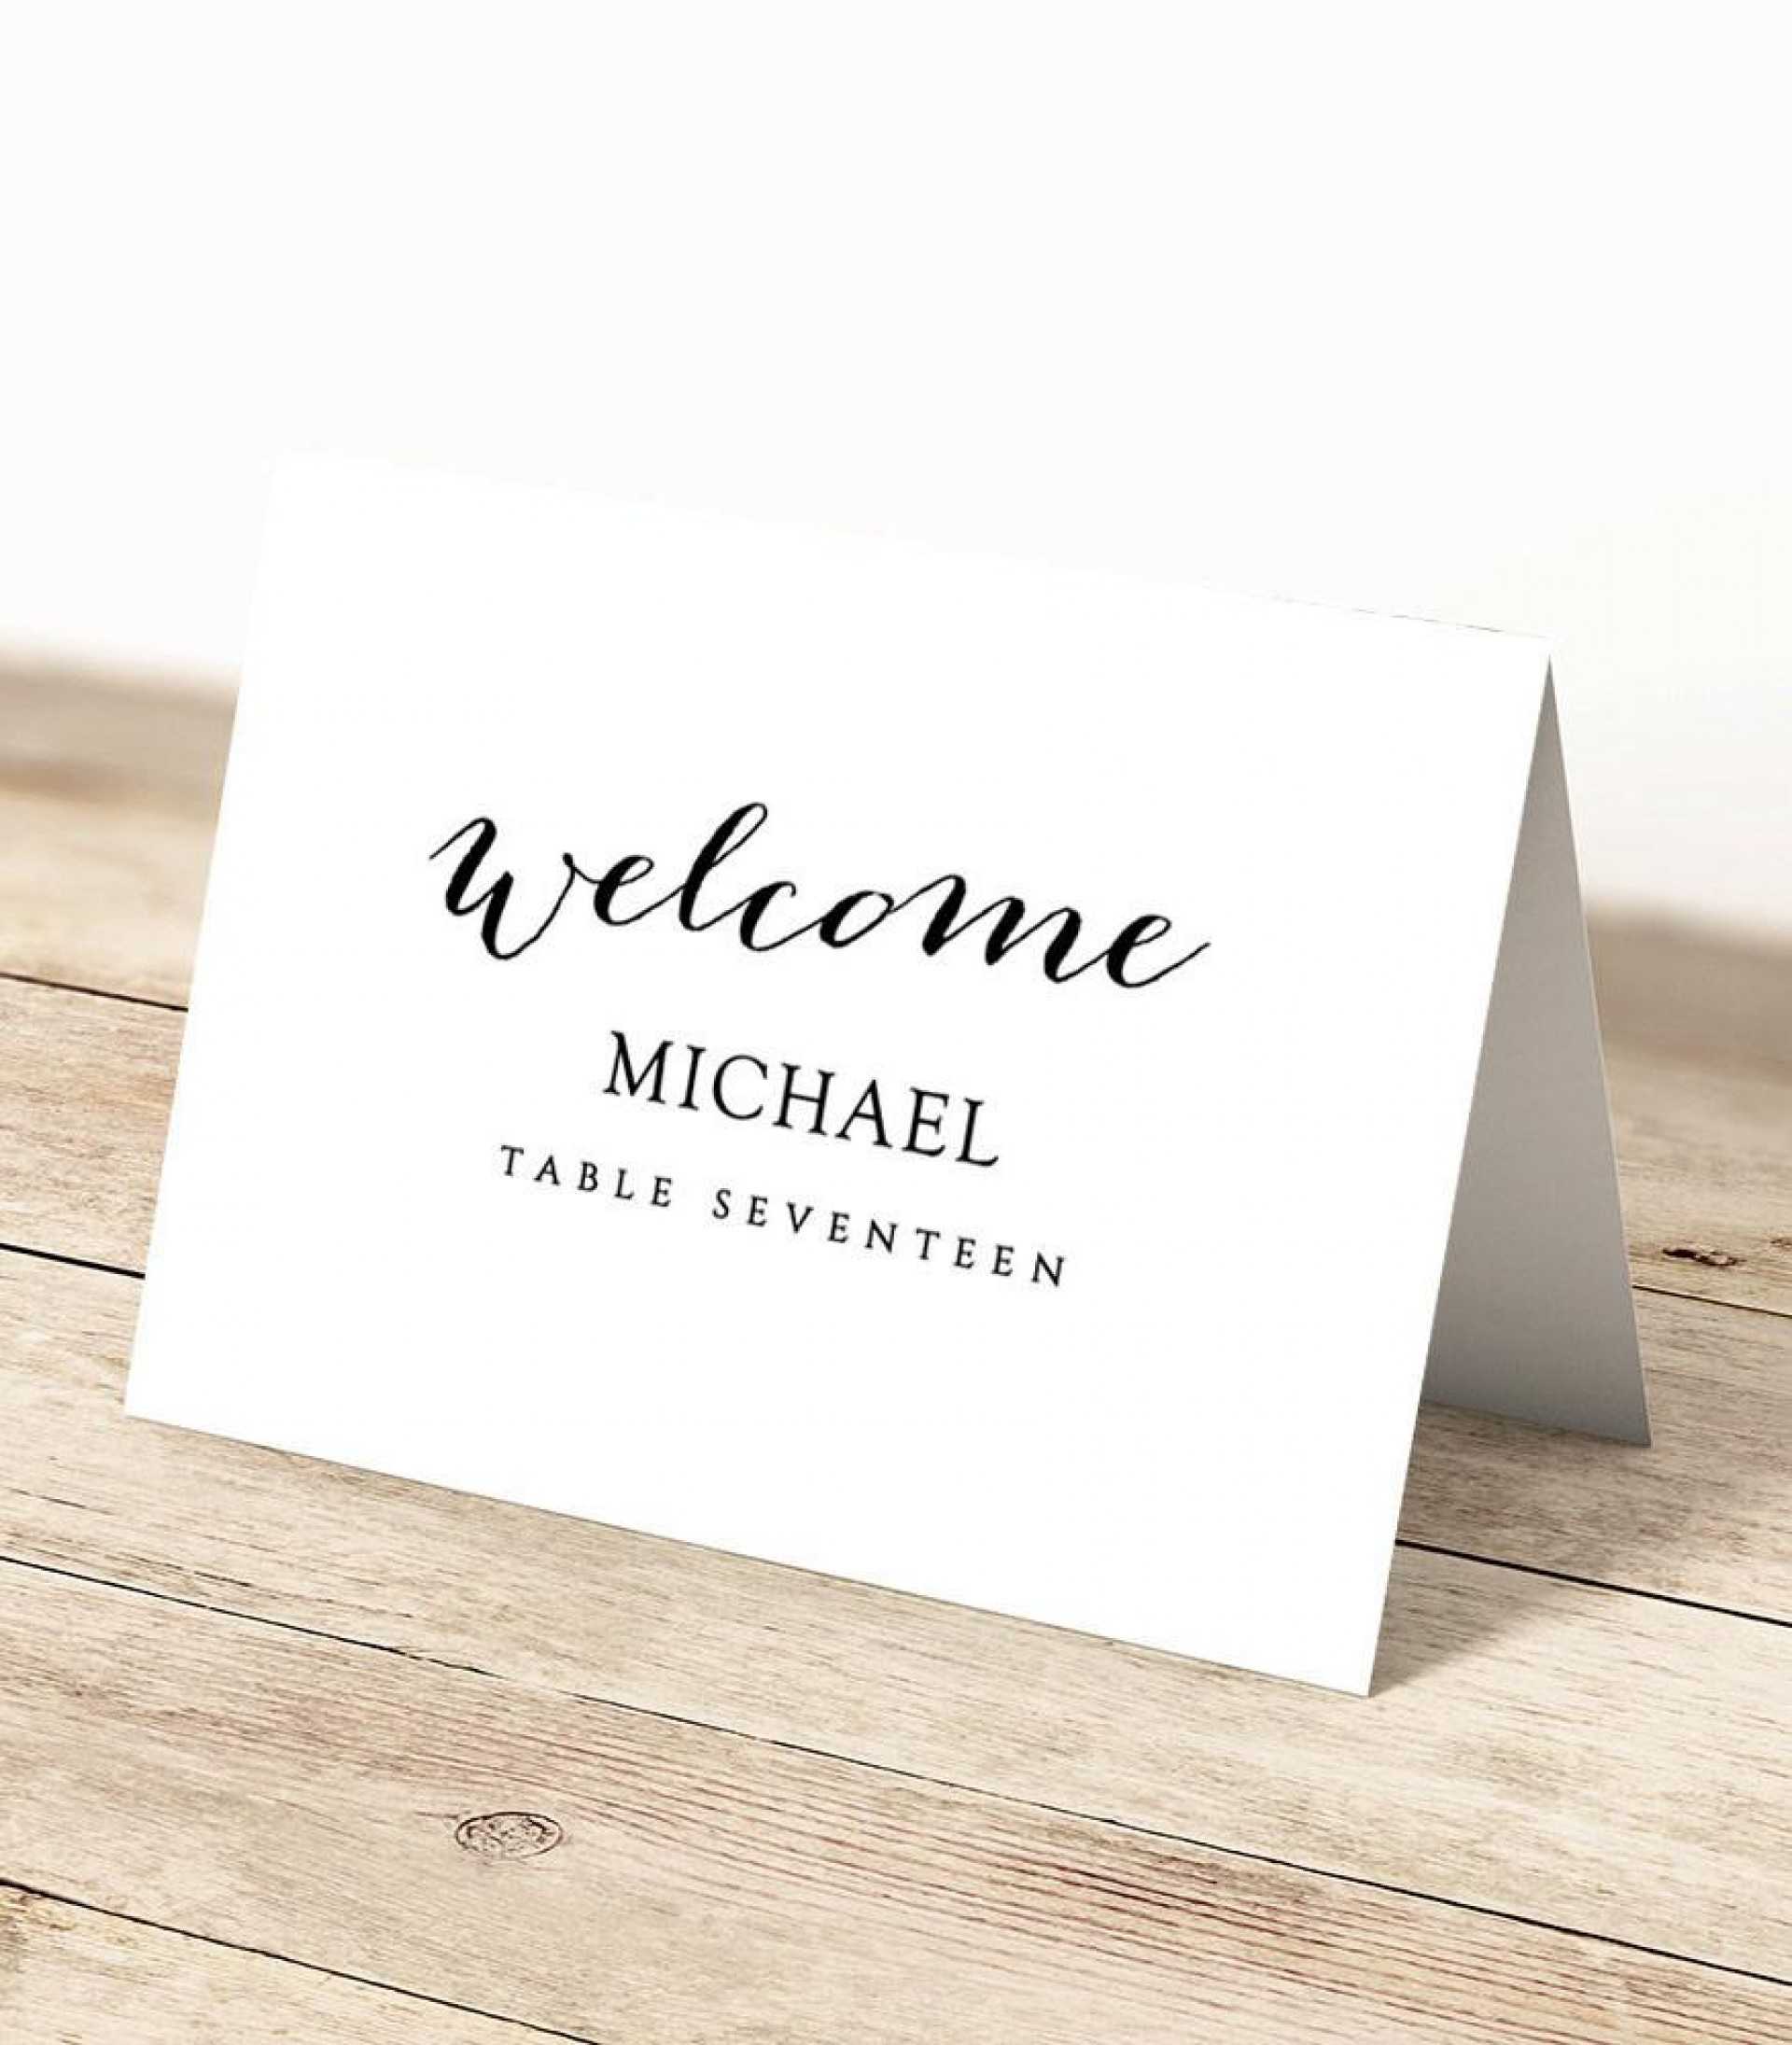 010 Template For Place Cards Ideas Flat Card With Free Place Card Templates 6 Per Page